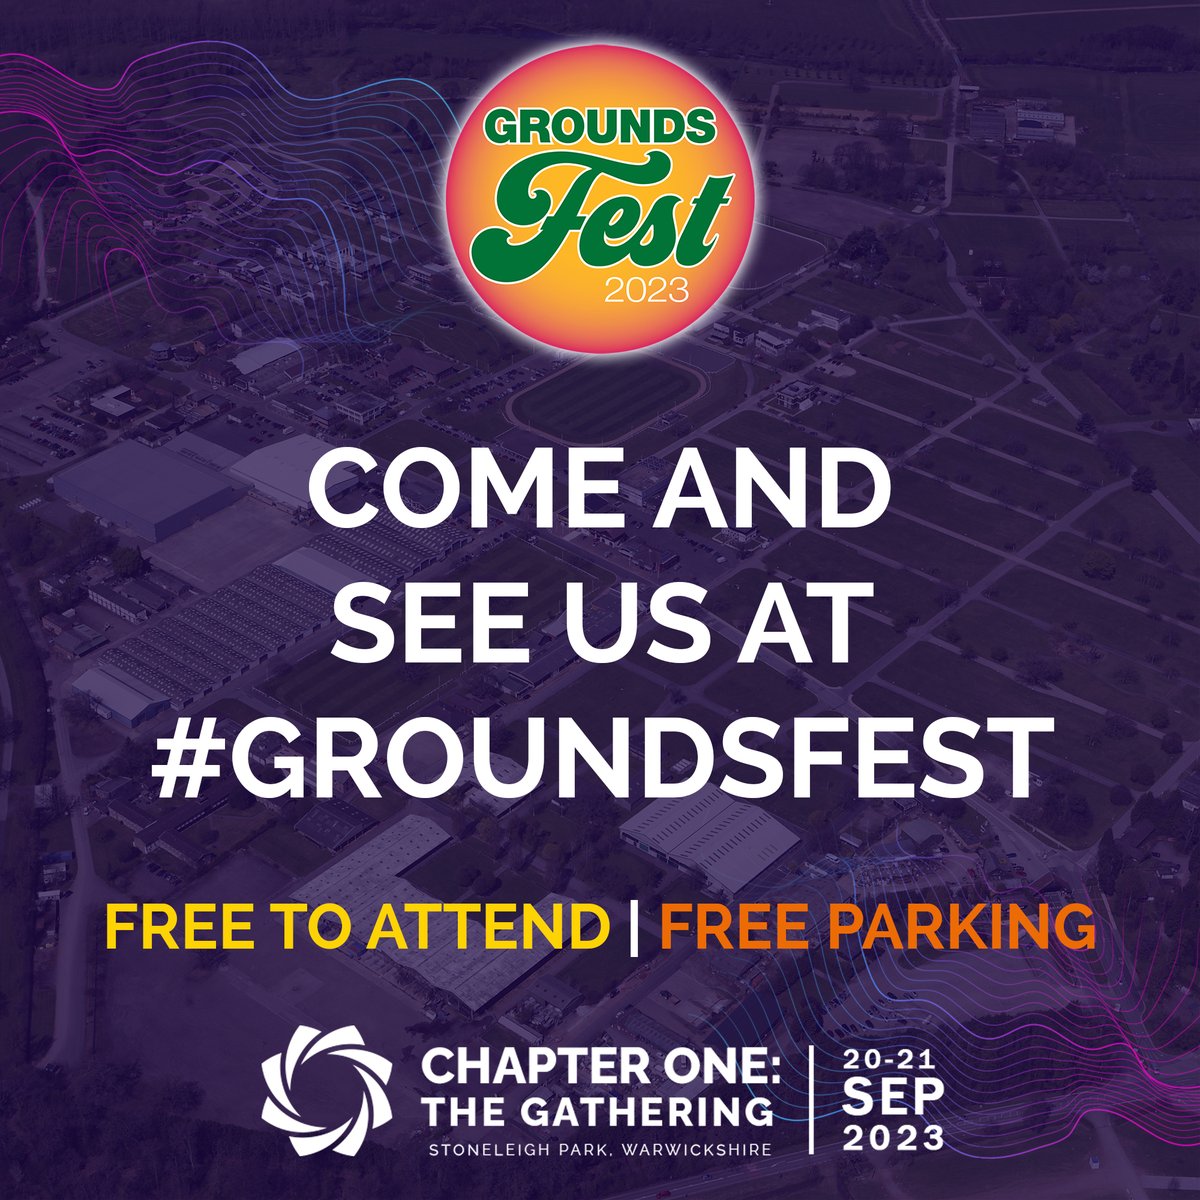 We're excited to be part of Chapter One of GroundsFest this year!

You will find us in Hall 1, Stand 29

Will you be heading to Stoneleigh for the first gathering of #GROUNDSFEST ?